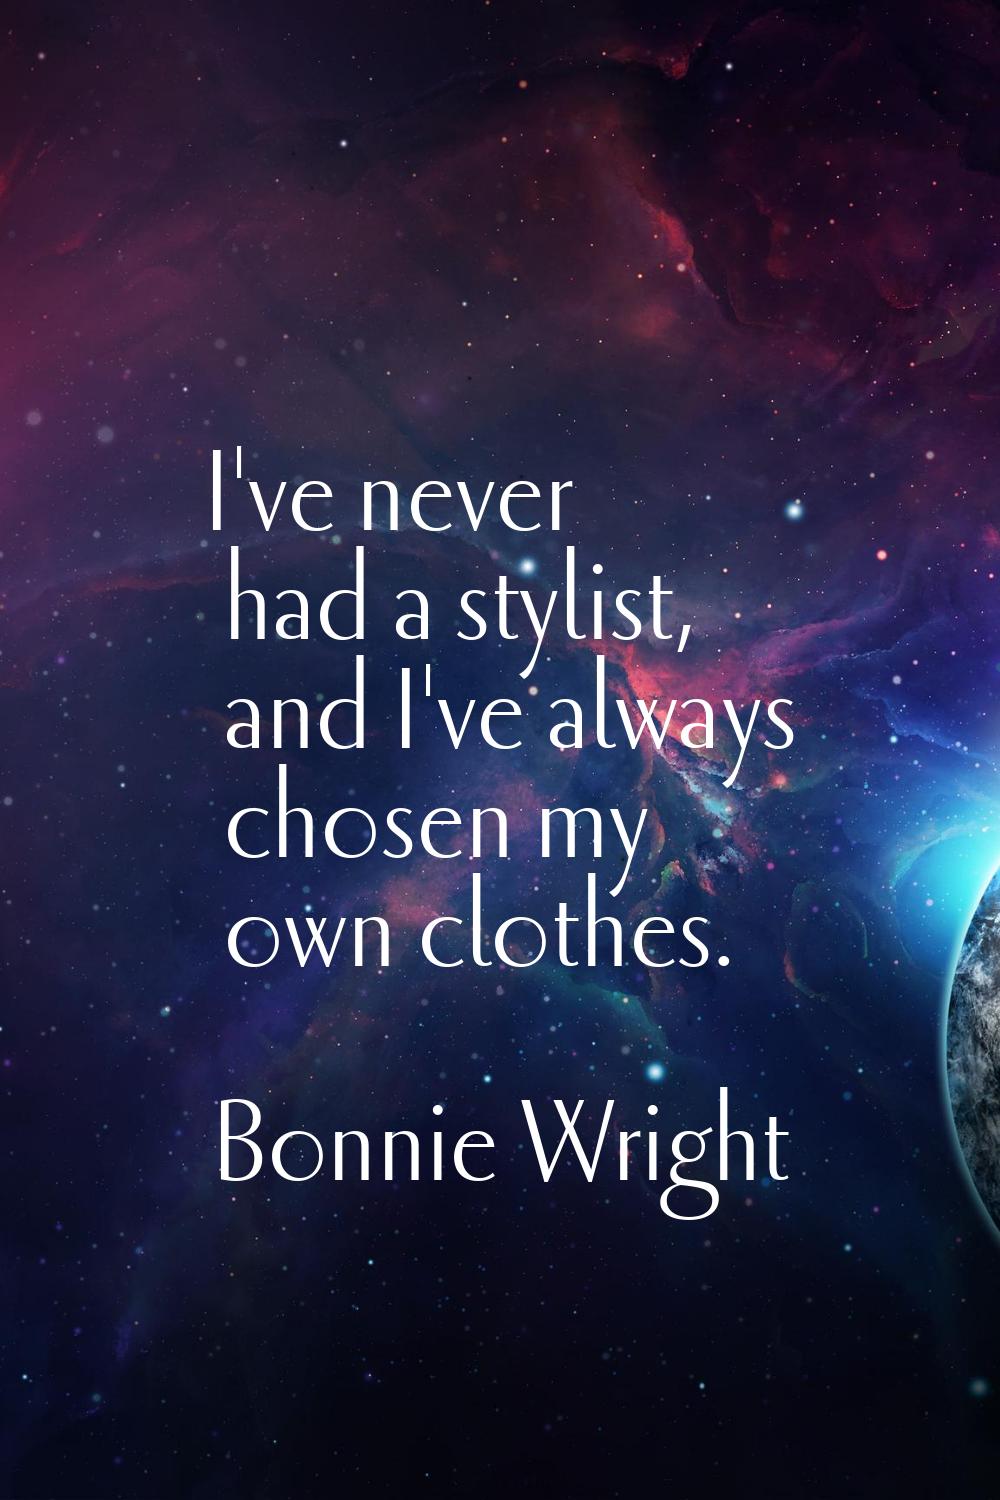 I've never had a stylist, and I've always chosen my own clothes.